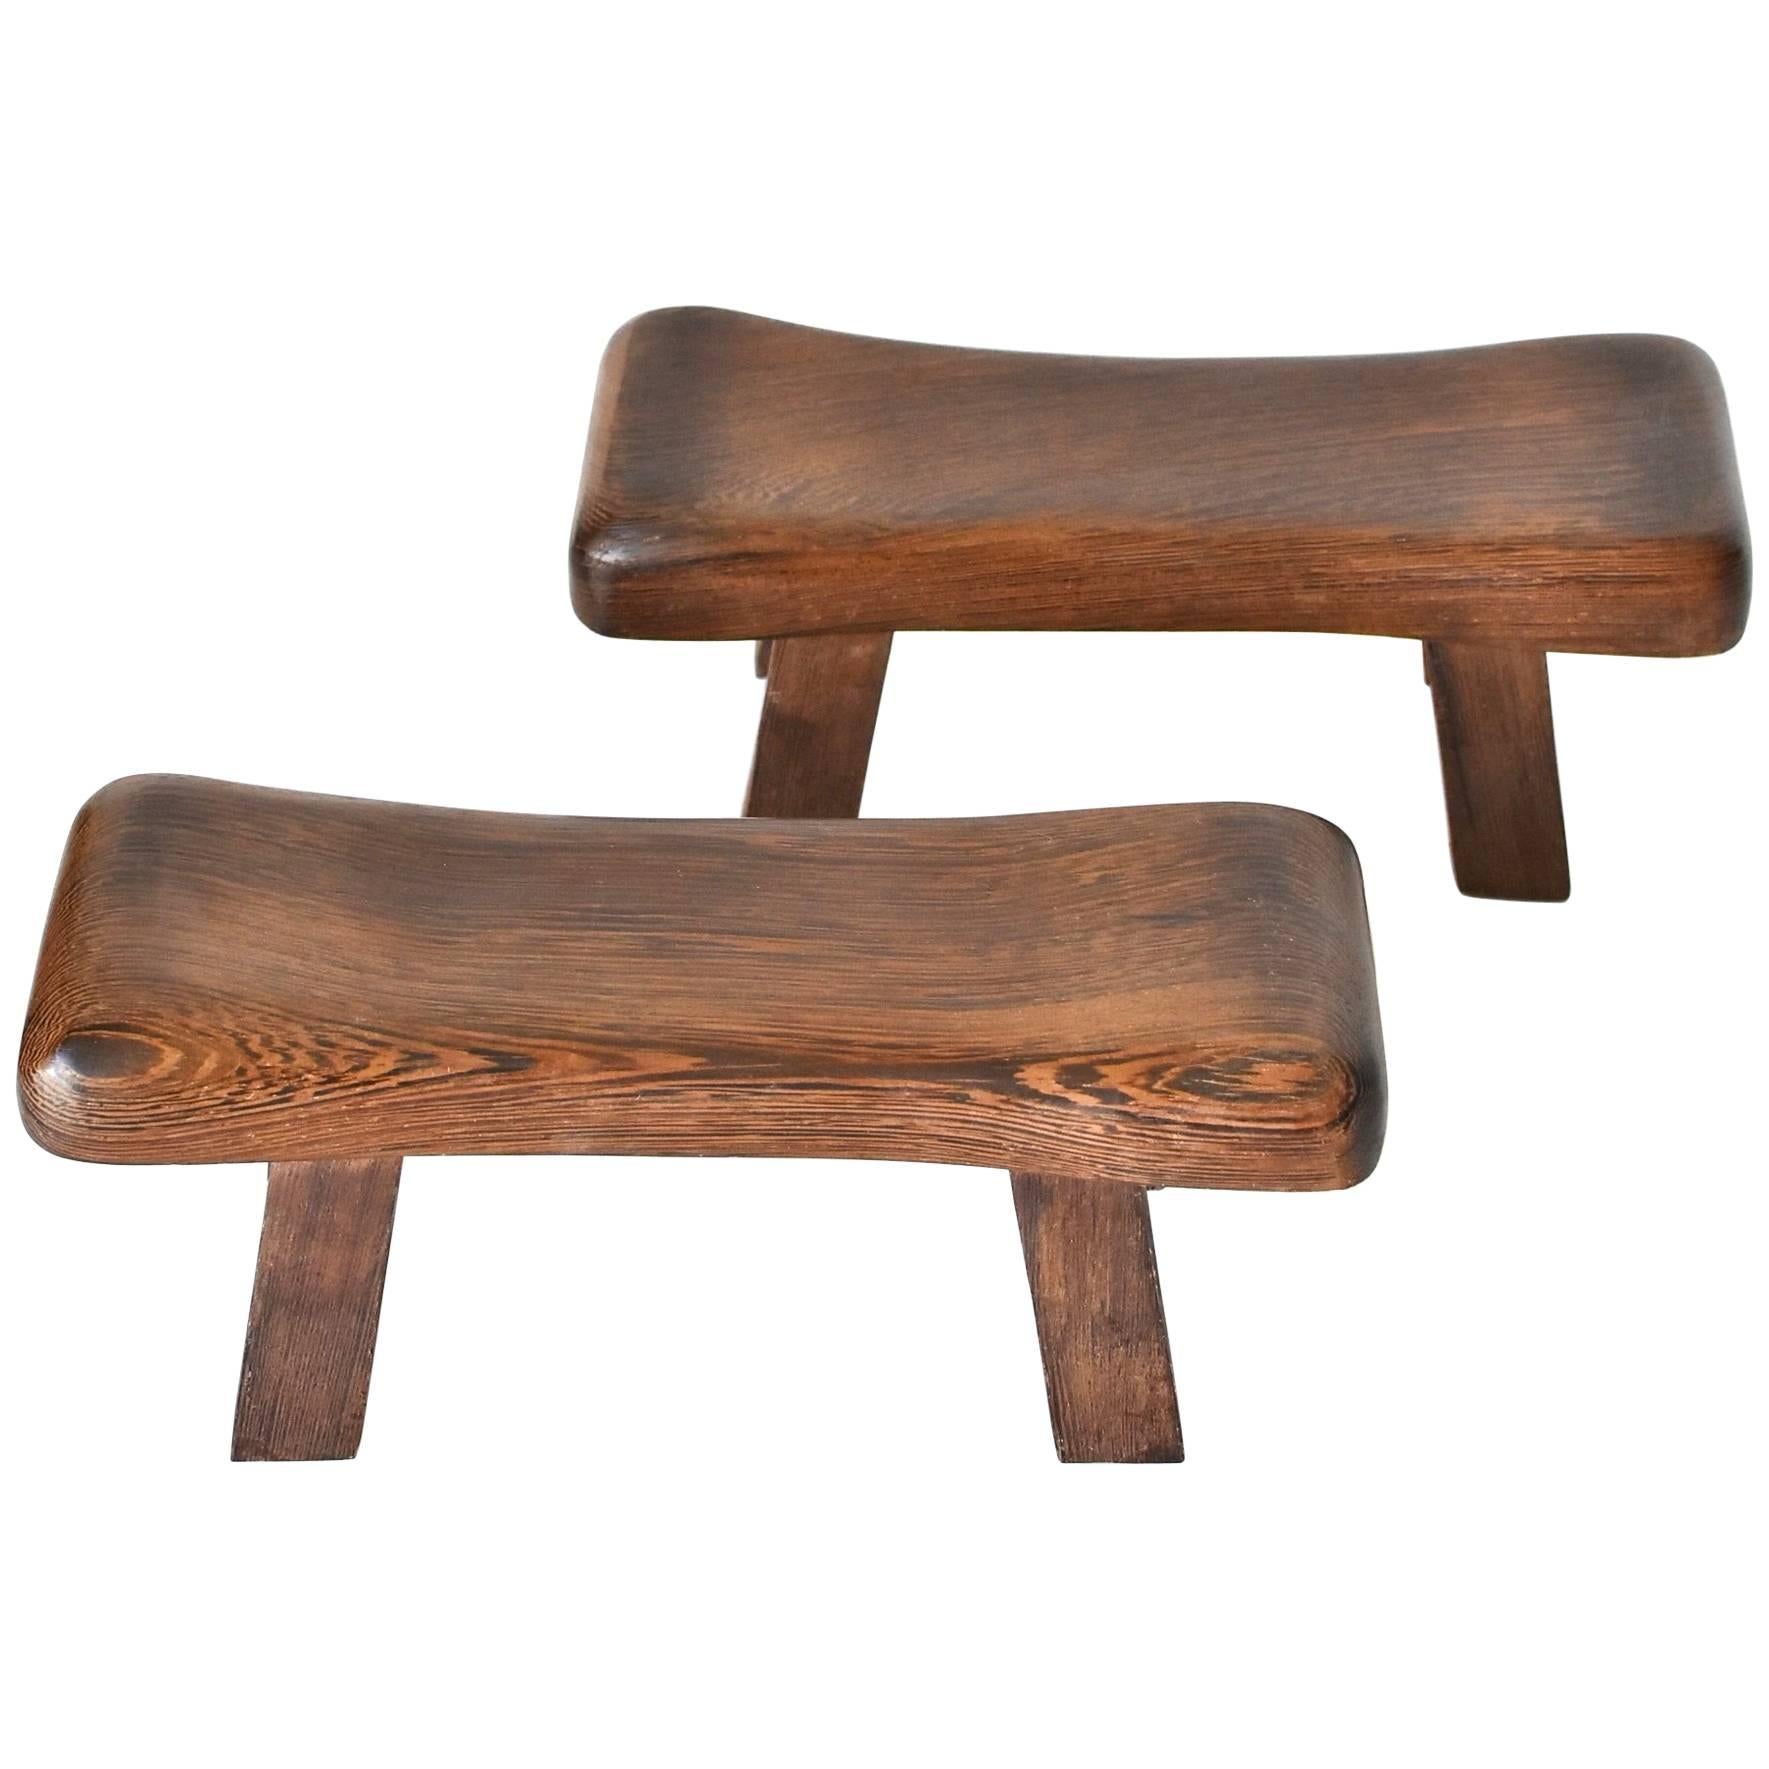 Pair of Wenge Wood Mini Stools, Headrests, Stands For Sale